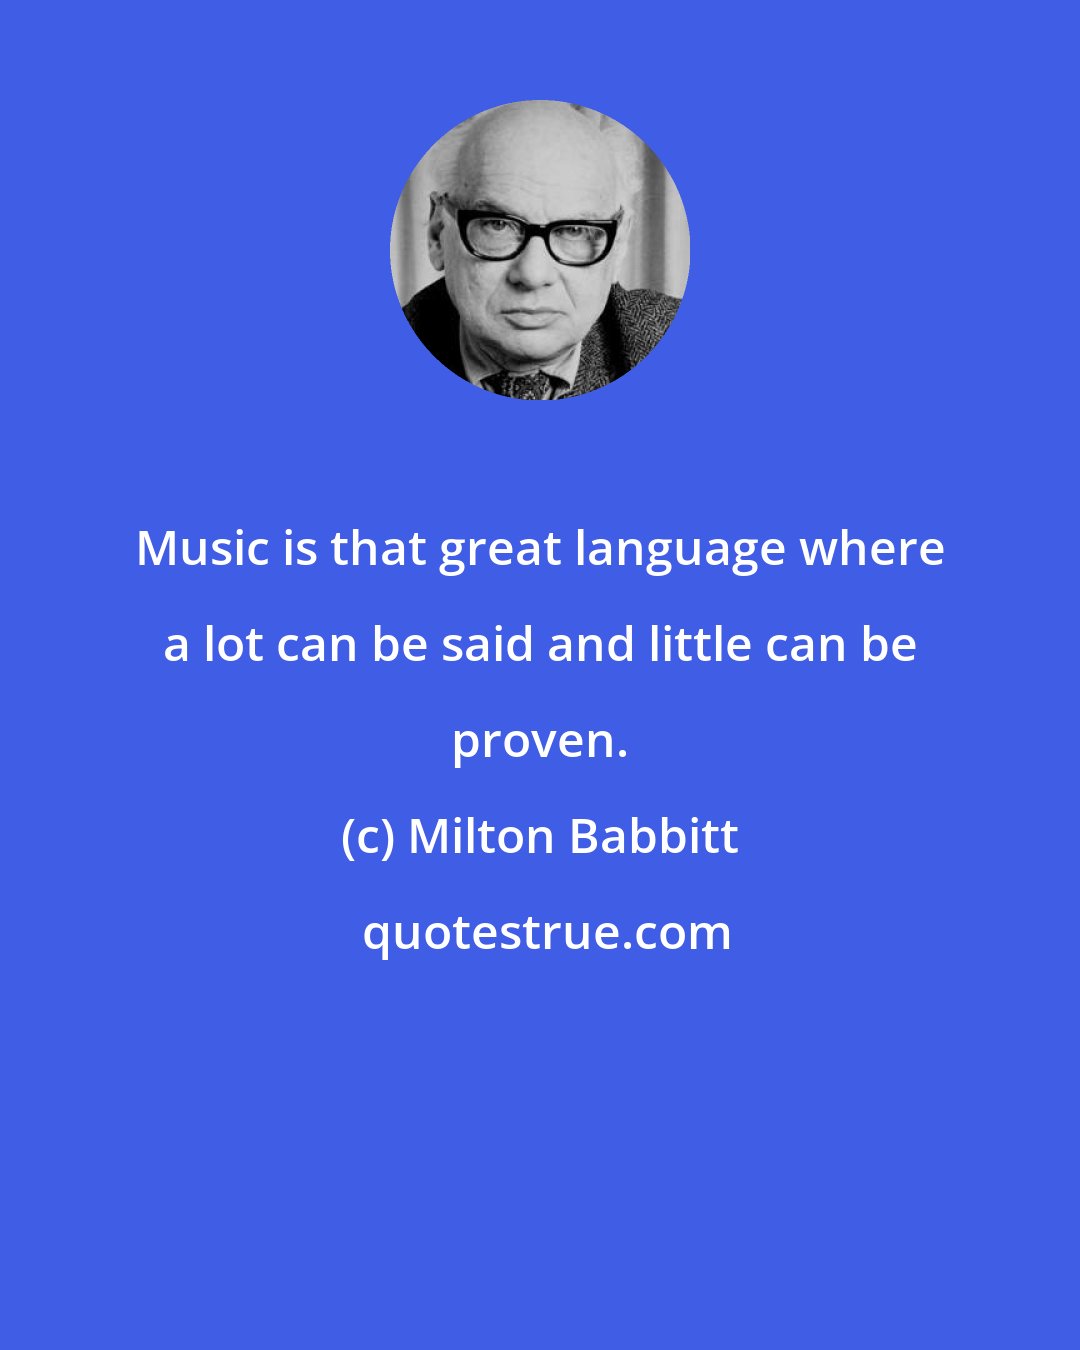 Milton Babbitt: Music is that great language where a lot can be said and little can be proven.